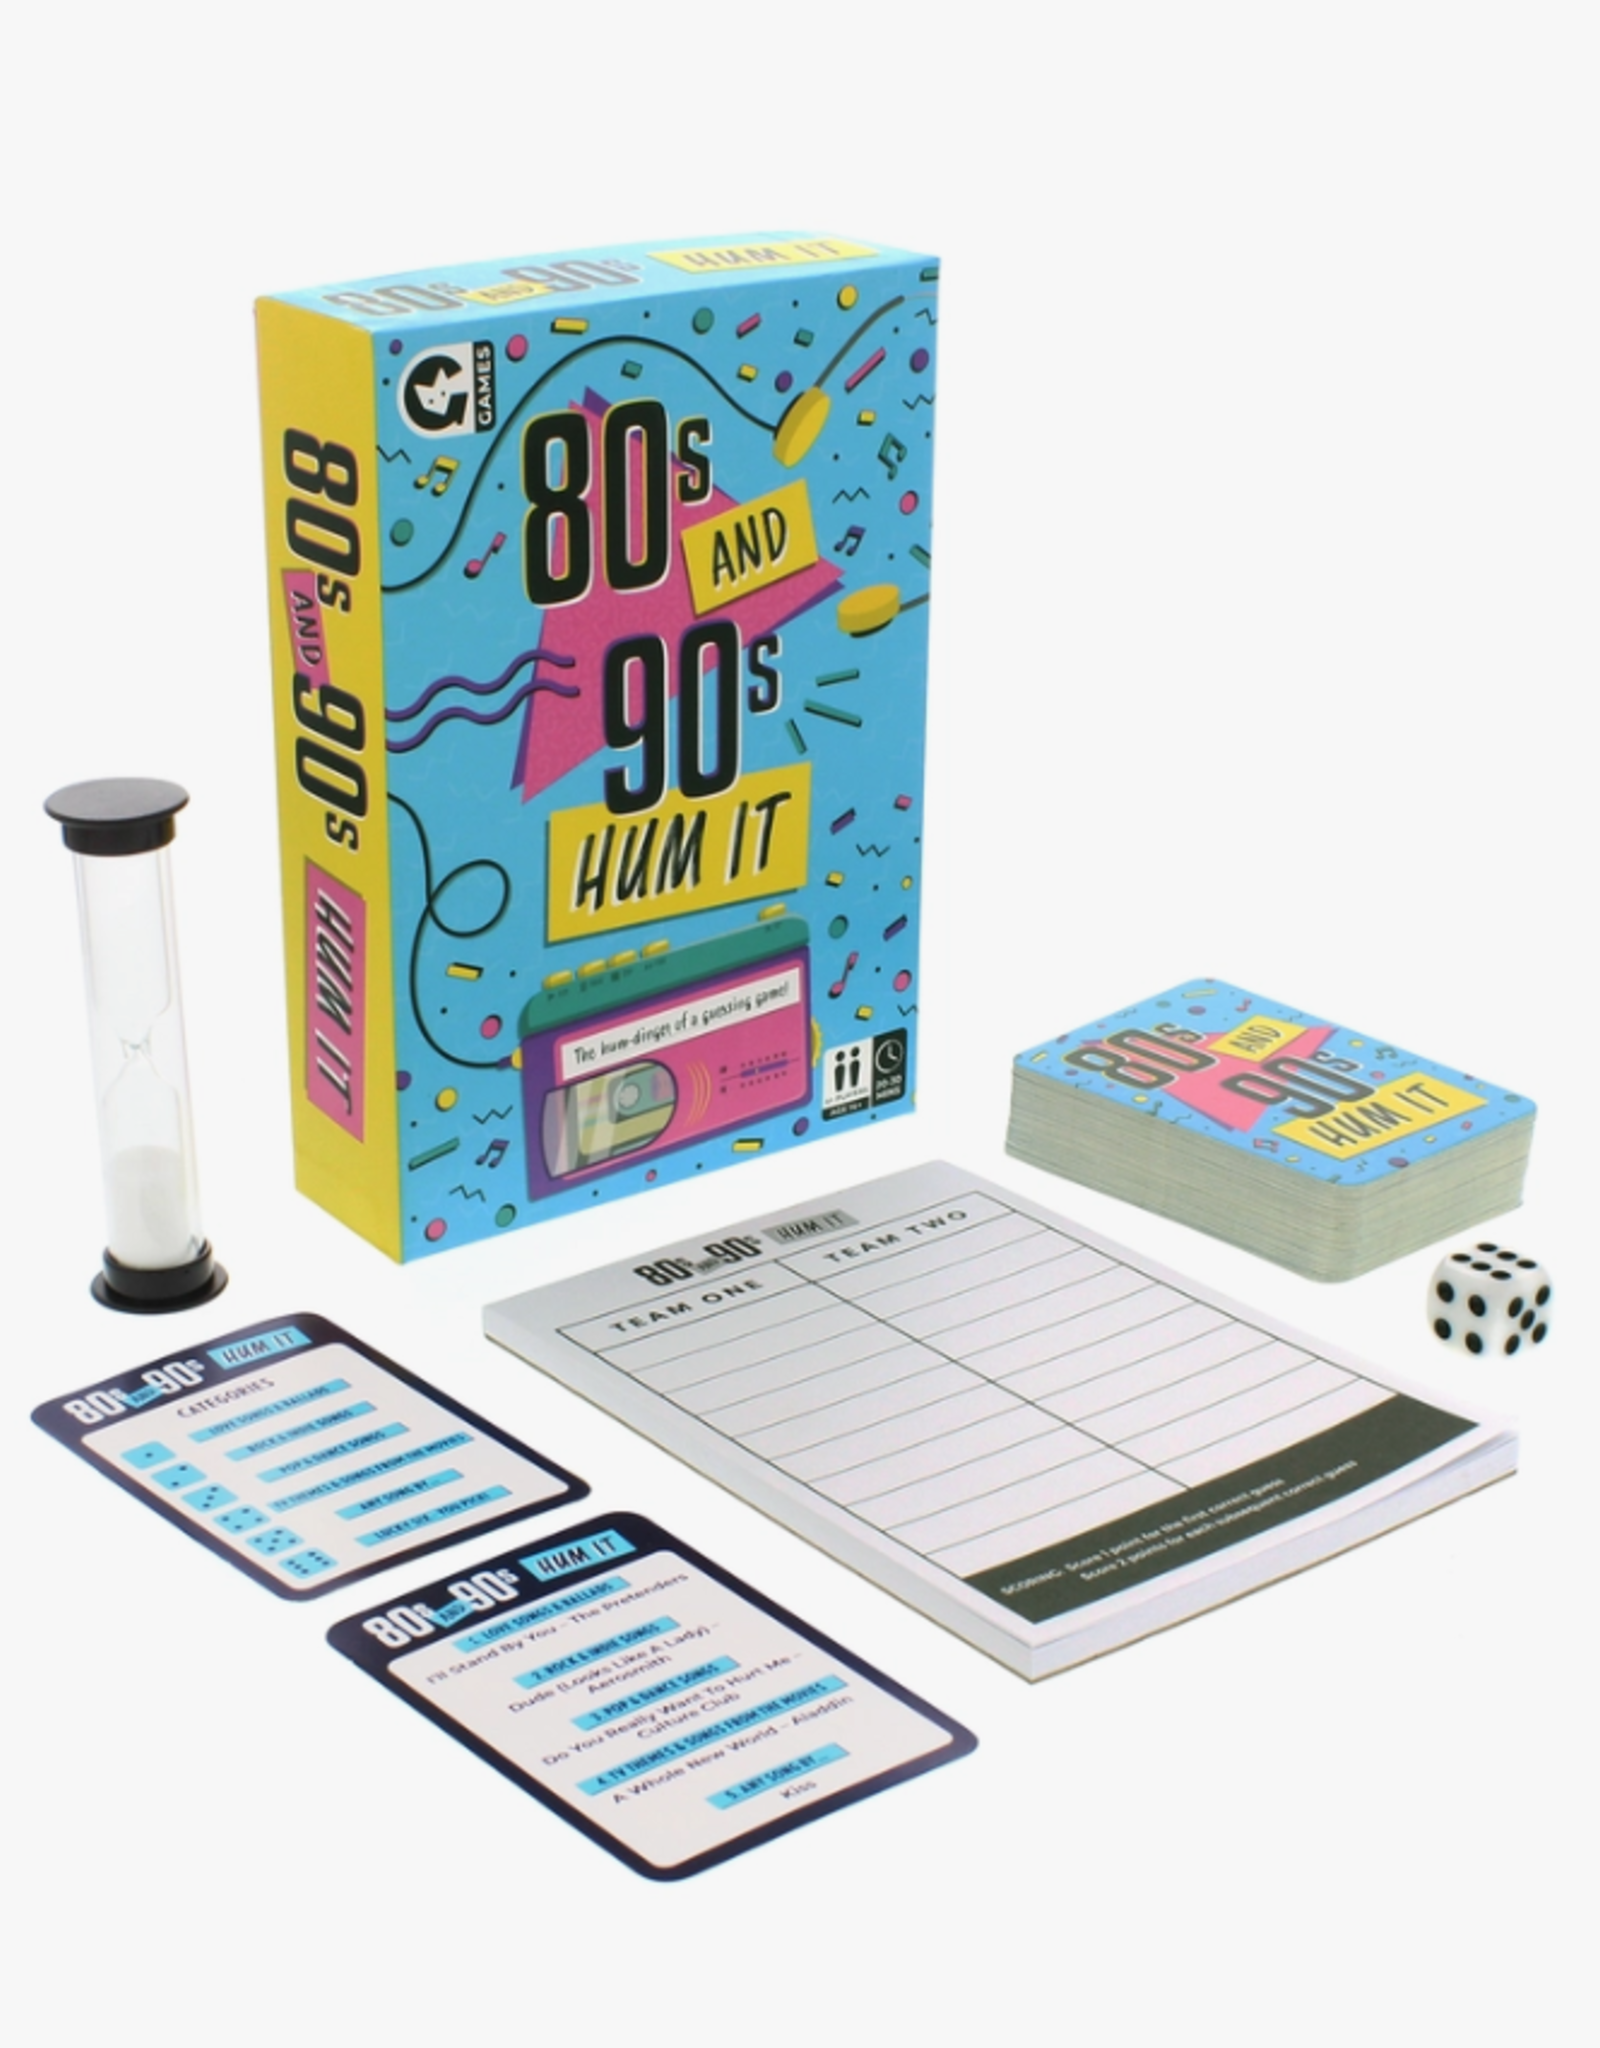 Ginger Fox Games Game - 80s and 90s Hum It